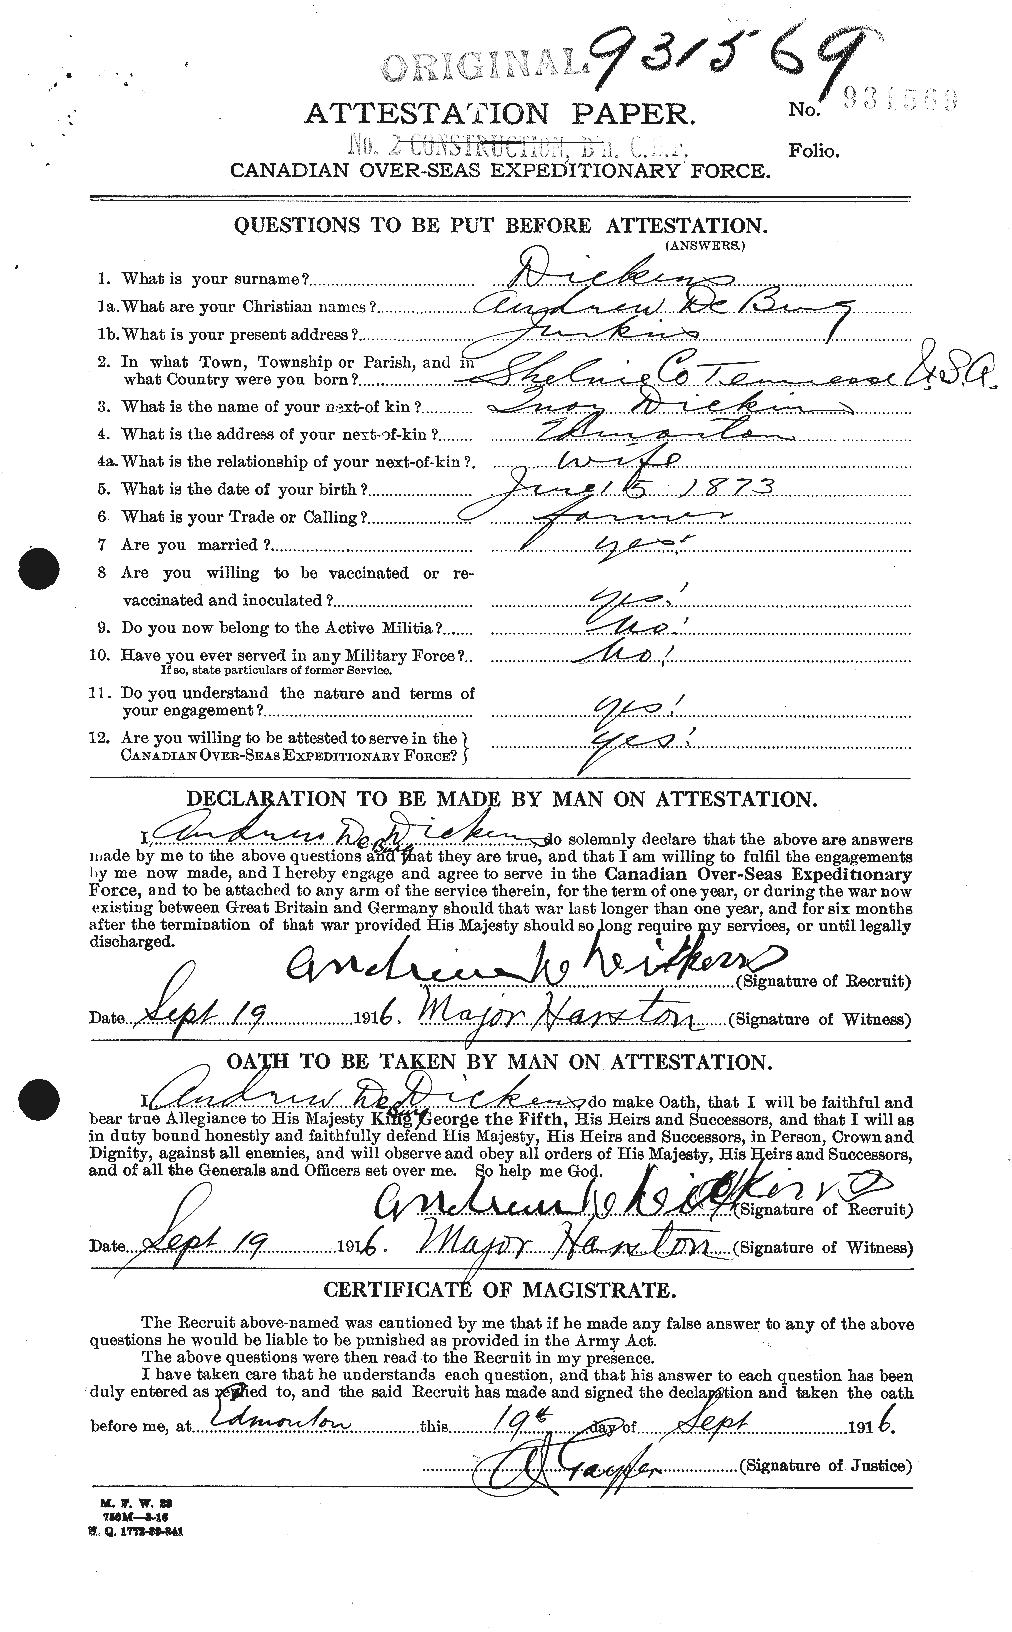 Personnel Records of the First World War - CEF 290593a